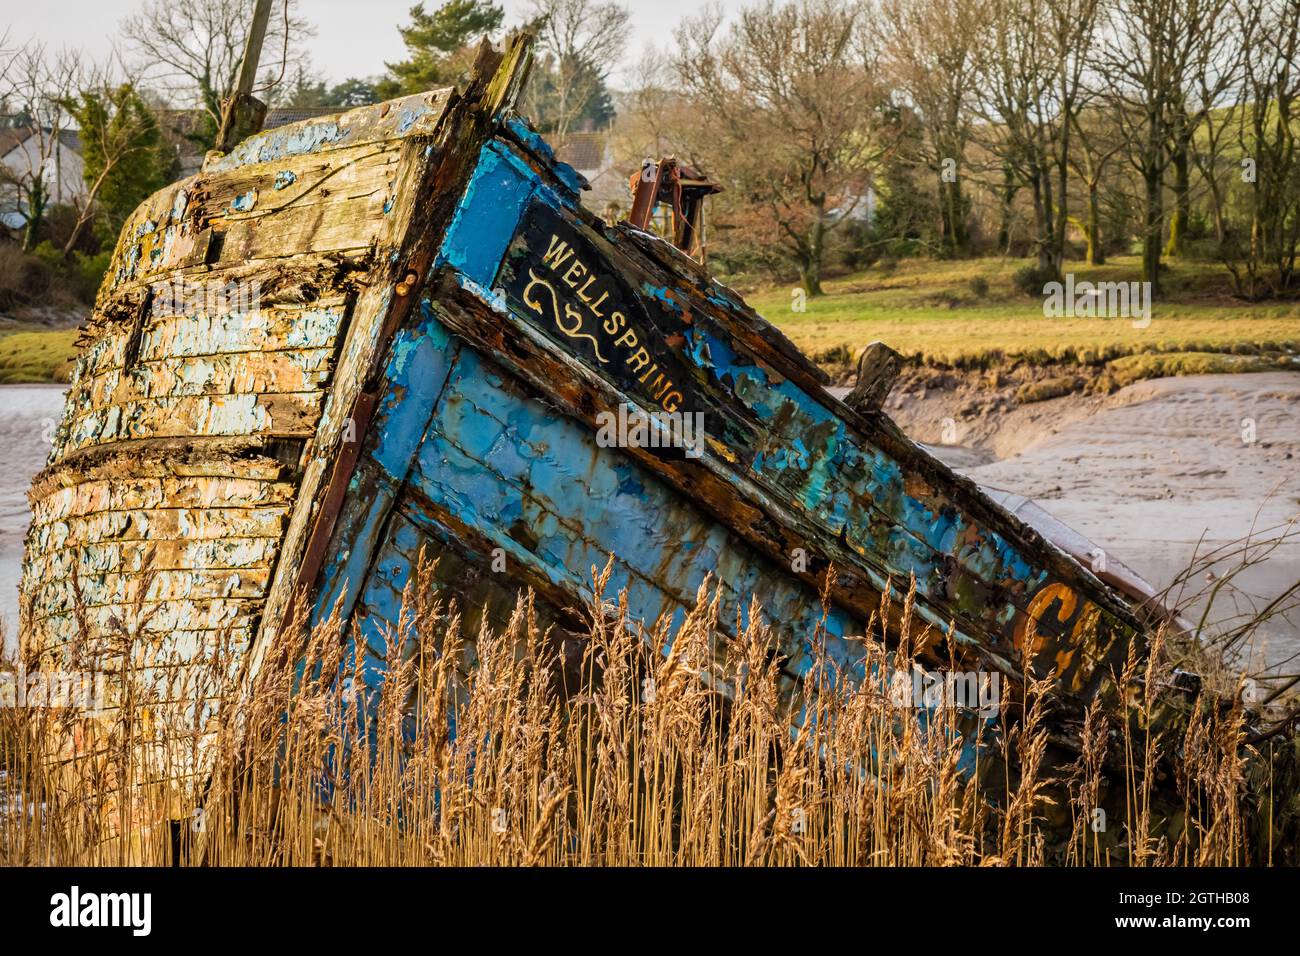 Kirkcudbright, Scotland - January 9th 2021: The bow of an old ship wrecked wooden boat called the Wellspring, beached on an estuary grass bank Stock Photo